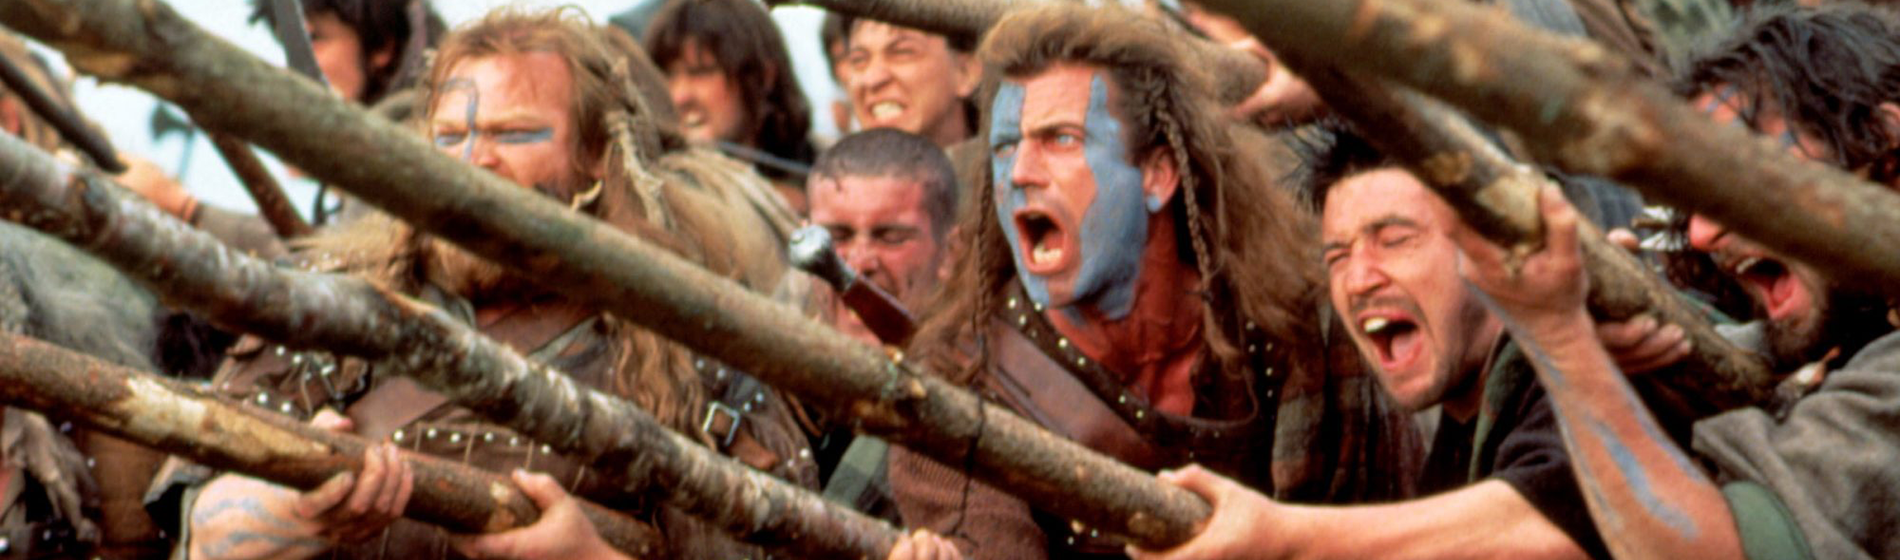 A still from 1995's Braveheart